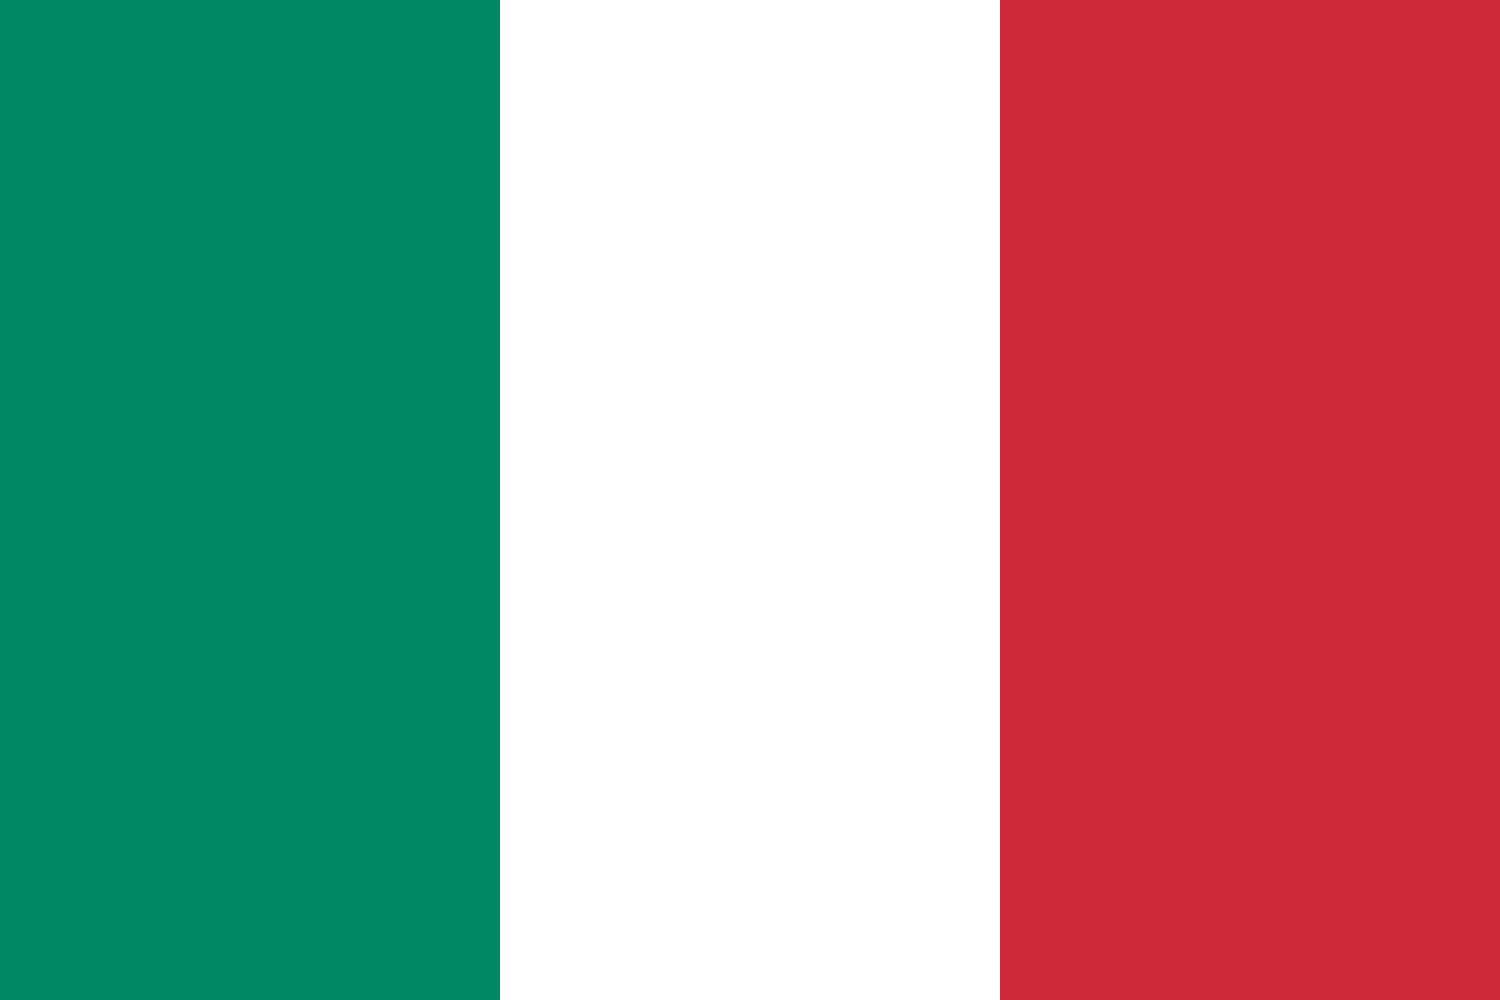 Download File:Flag of Italy (2003-2006).svg - Wikimedia Commons